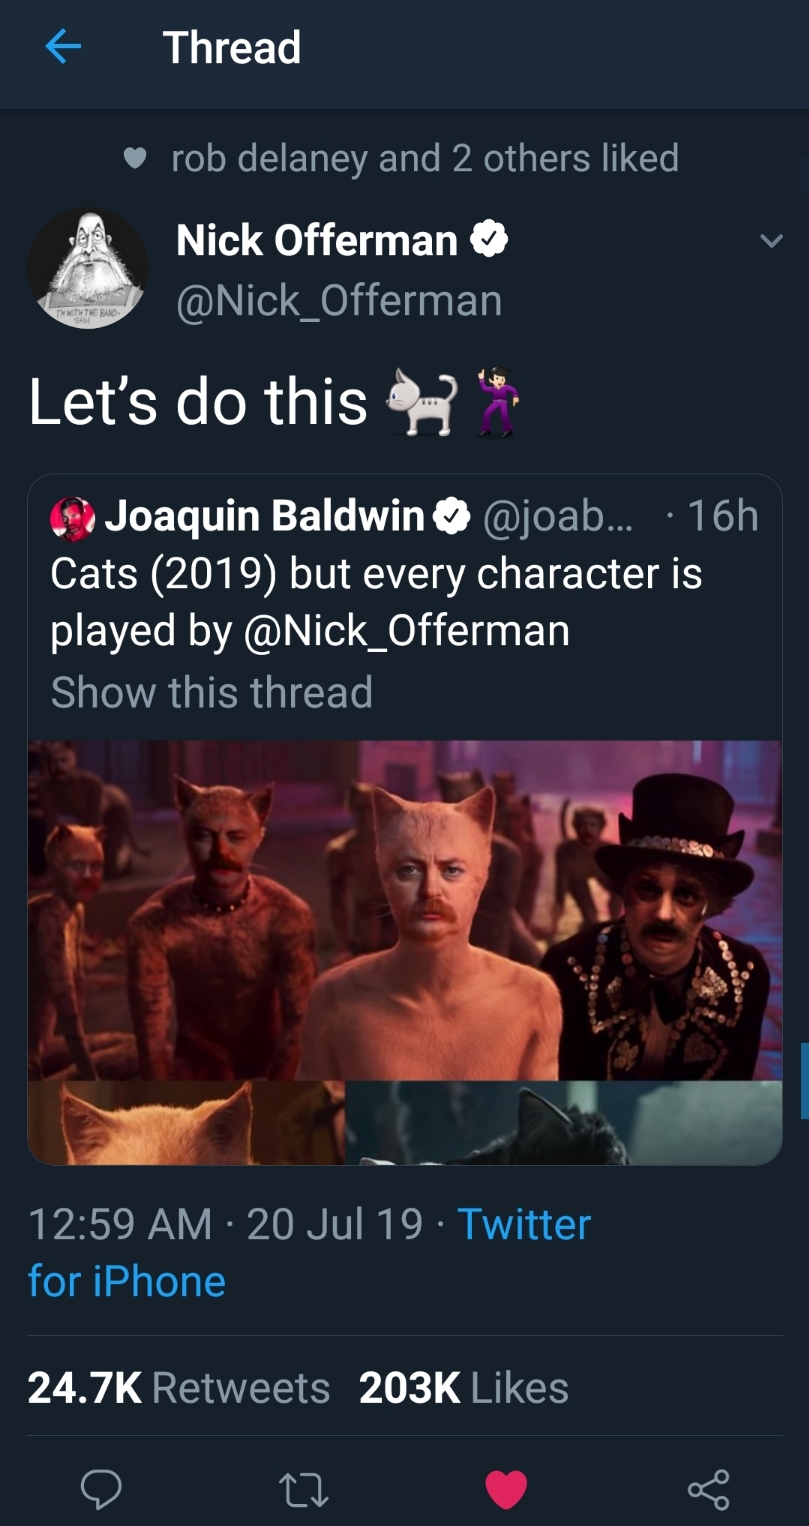 screenshot - Thread rob delaney and 2 others d Nick Offerman ' Let's do this Joaquin Baldwin ... 16h Cats 2019 but every character is played by Show this thread 20 Jul 19 Twitter for iPhone O Cd 8